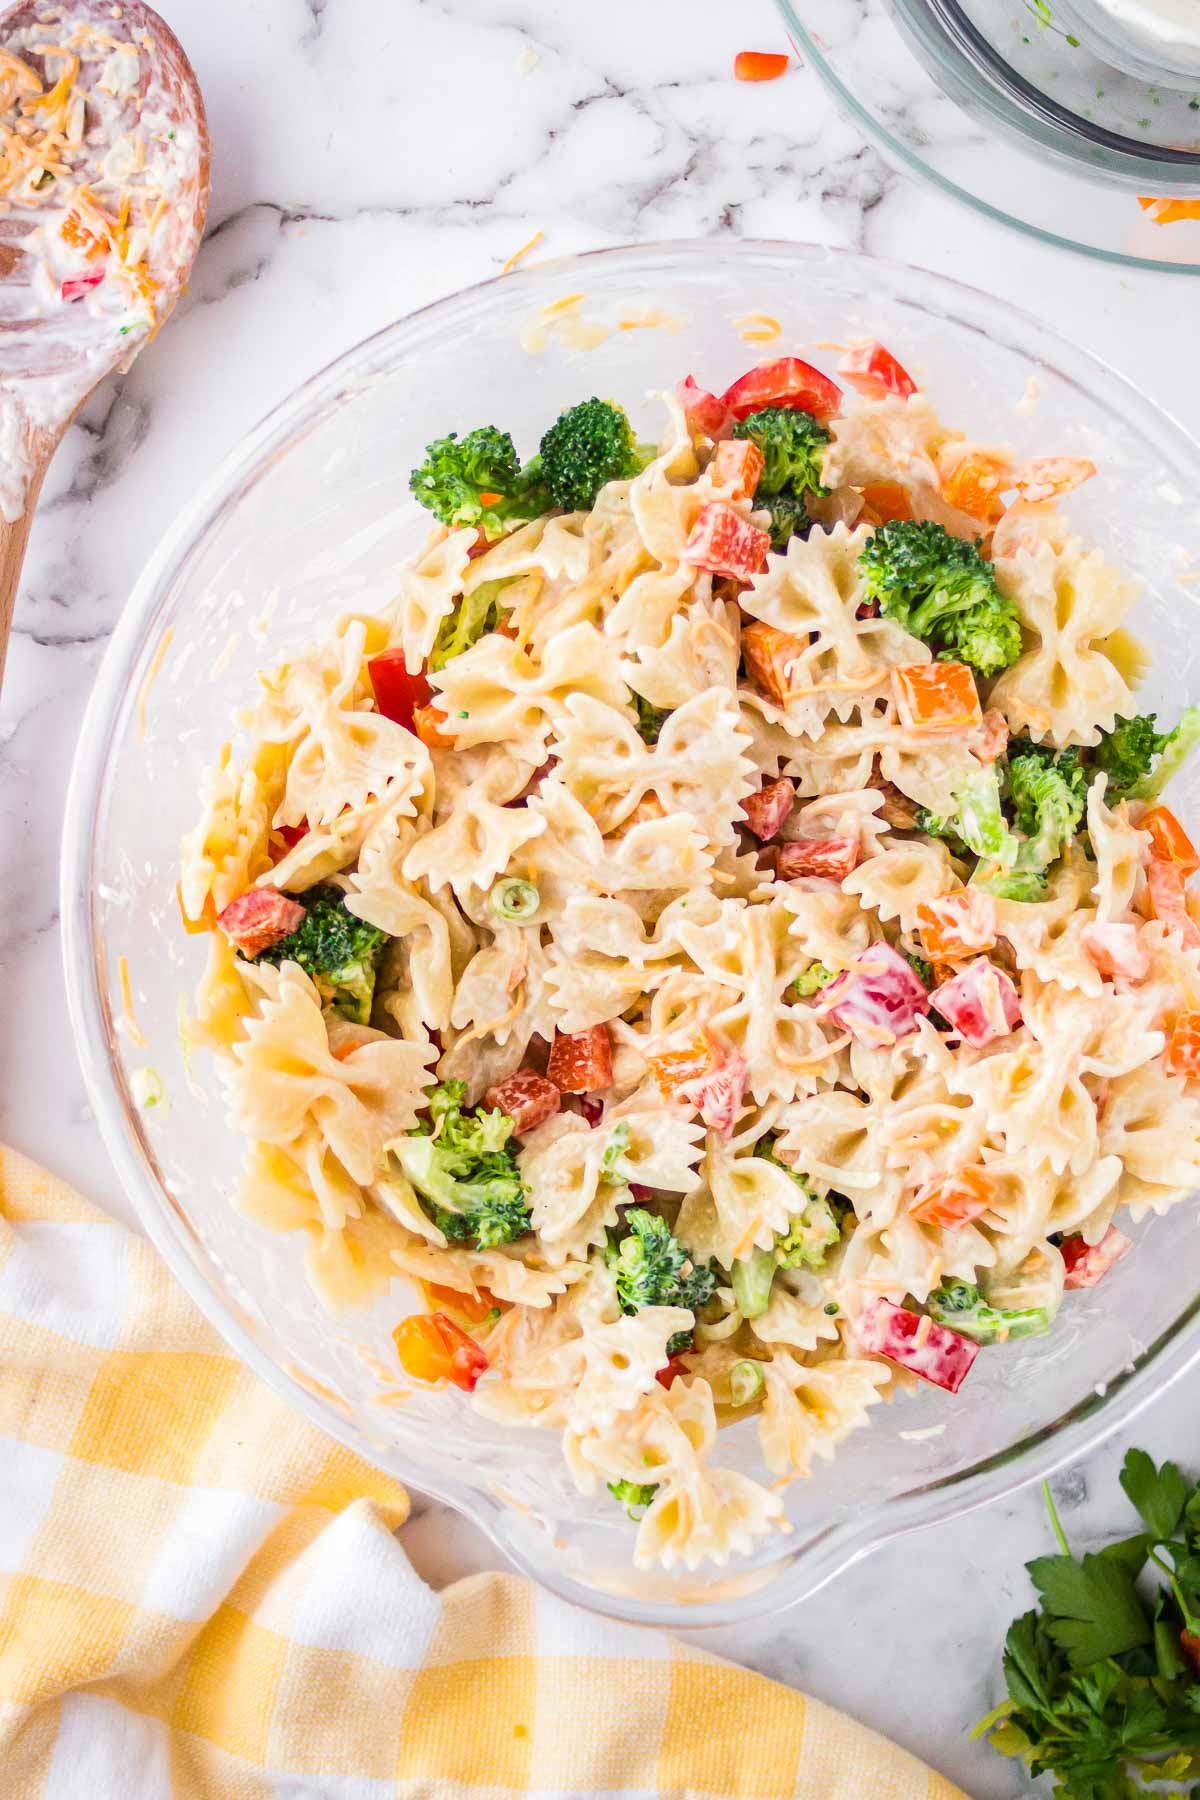 Broccoli pasta salad with ranch dressing in a bowl.